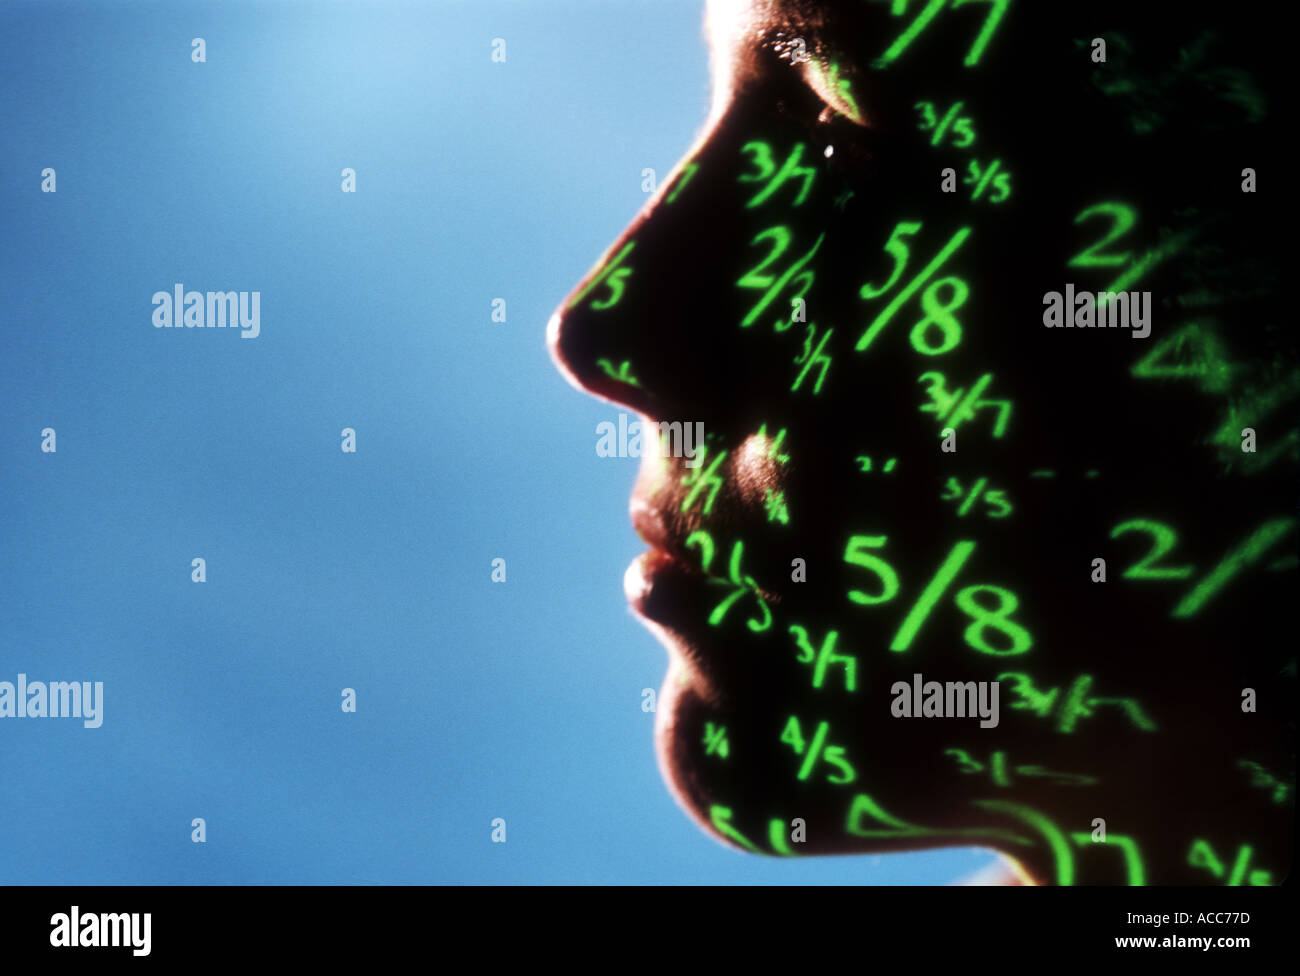 image of random fractions projected on business woman s face abstract Stock Photo